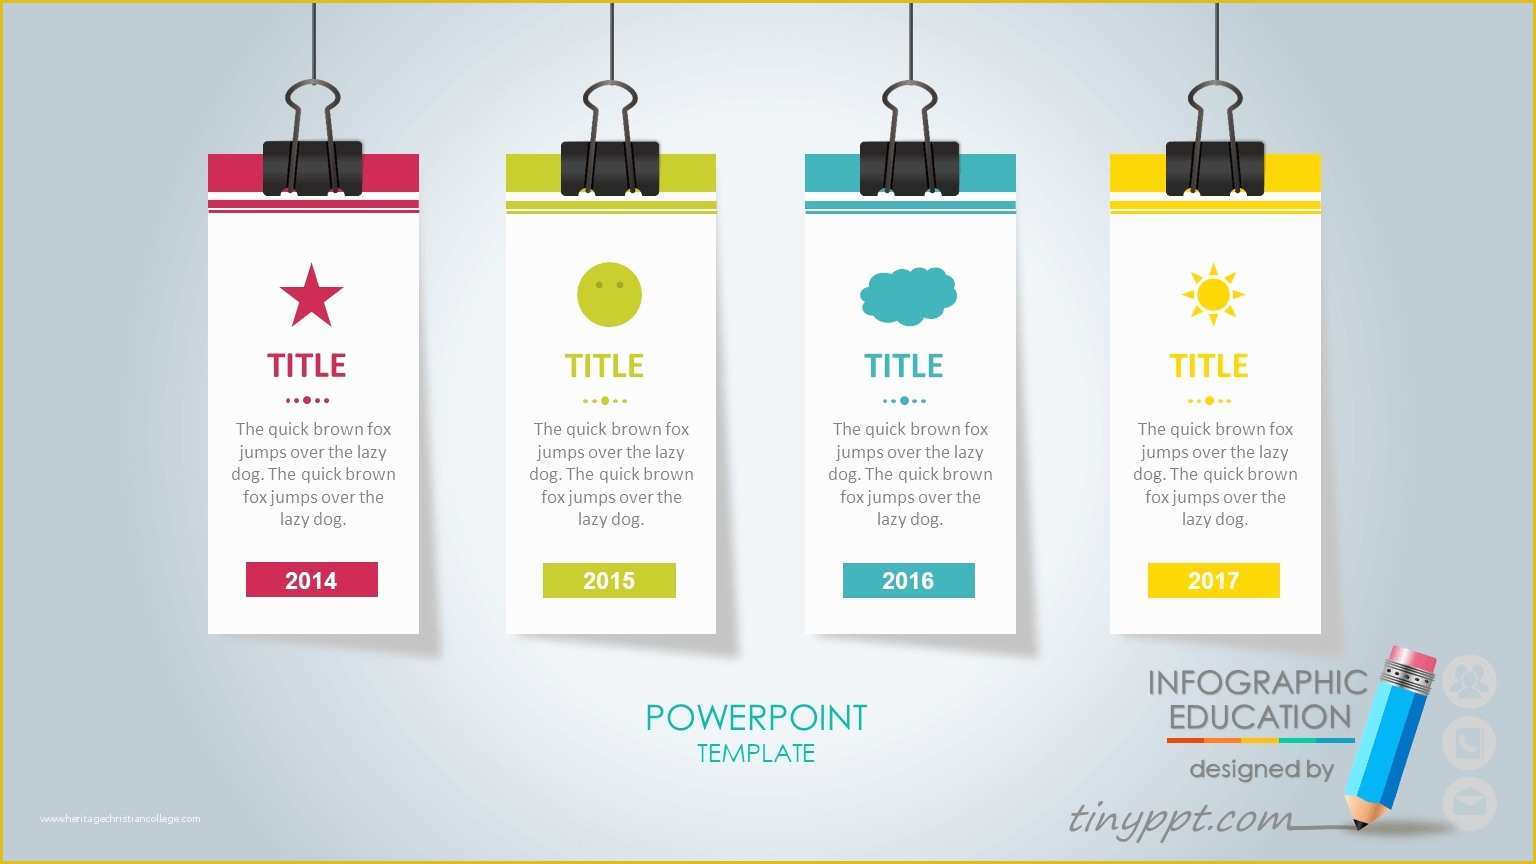 Free Powerpoint Templates 2017 Of Template Powerpoint Free Download 2016